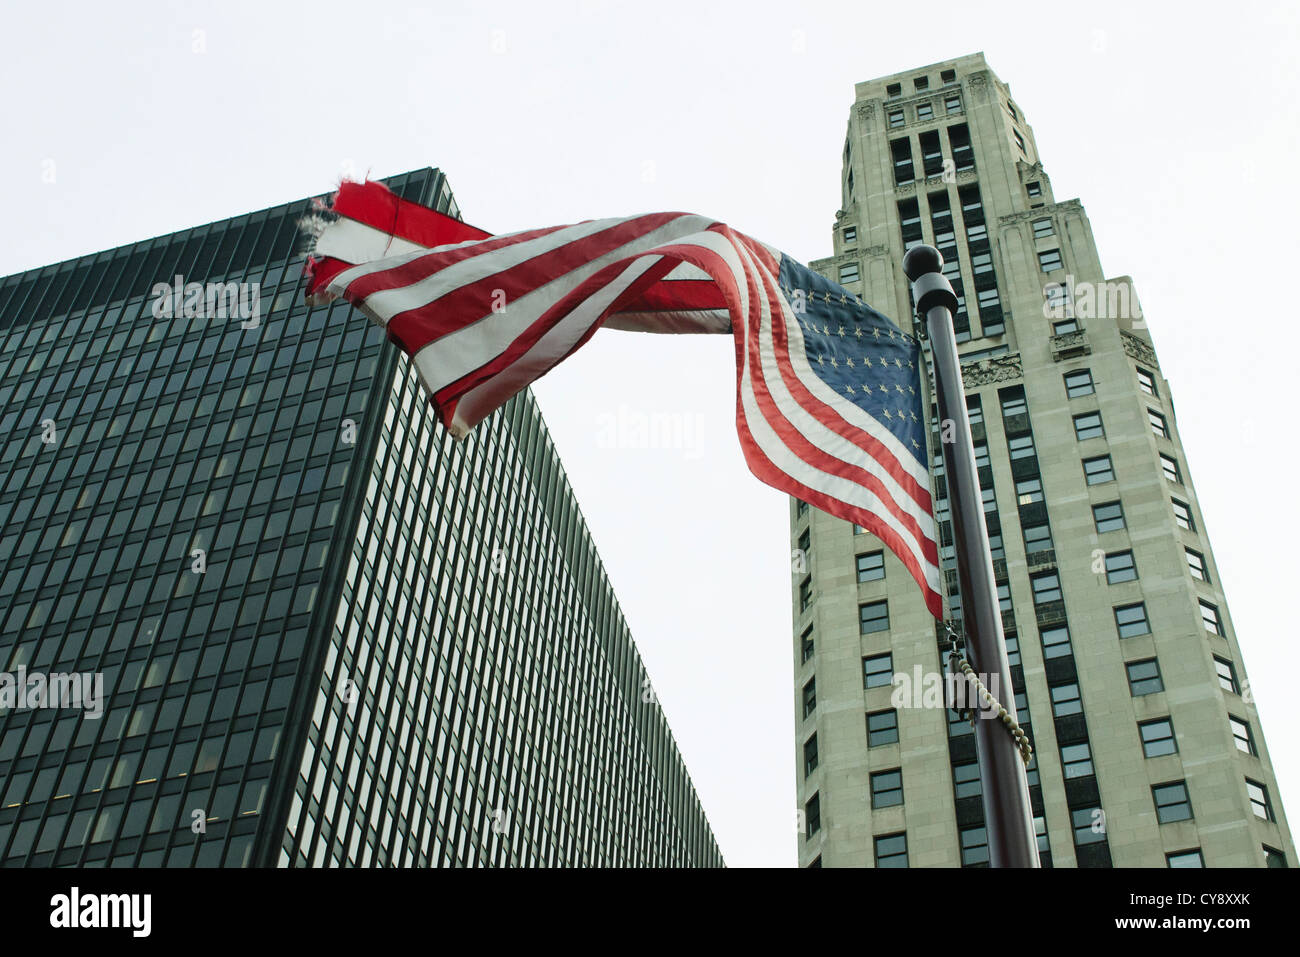 American flag waving in the wind, River North neighborhood, Chicago Stock Photo